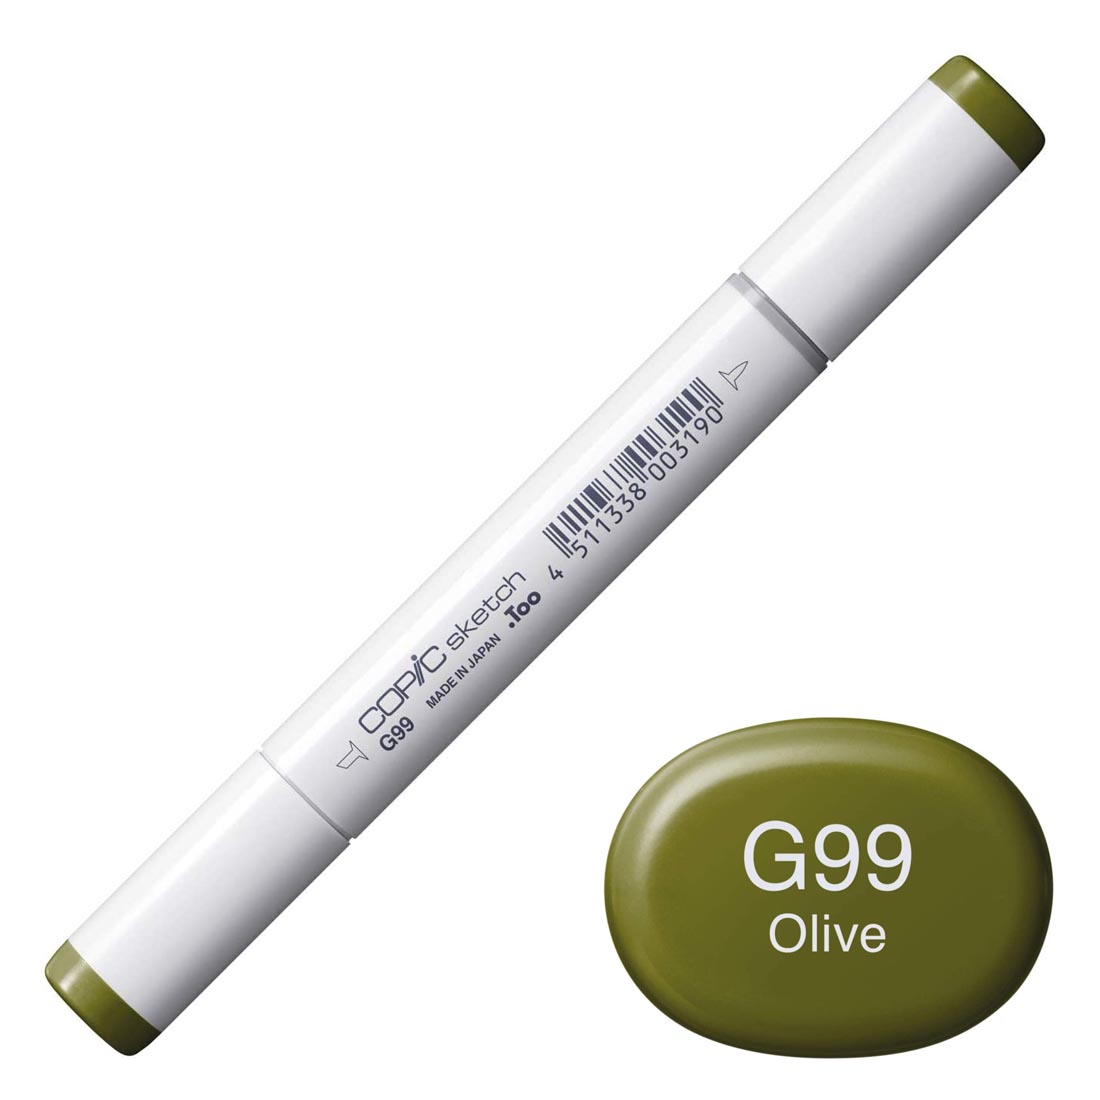 COPIC Sketch Marker with a color swatch and text of G99 Olive